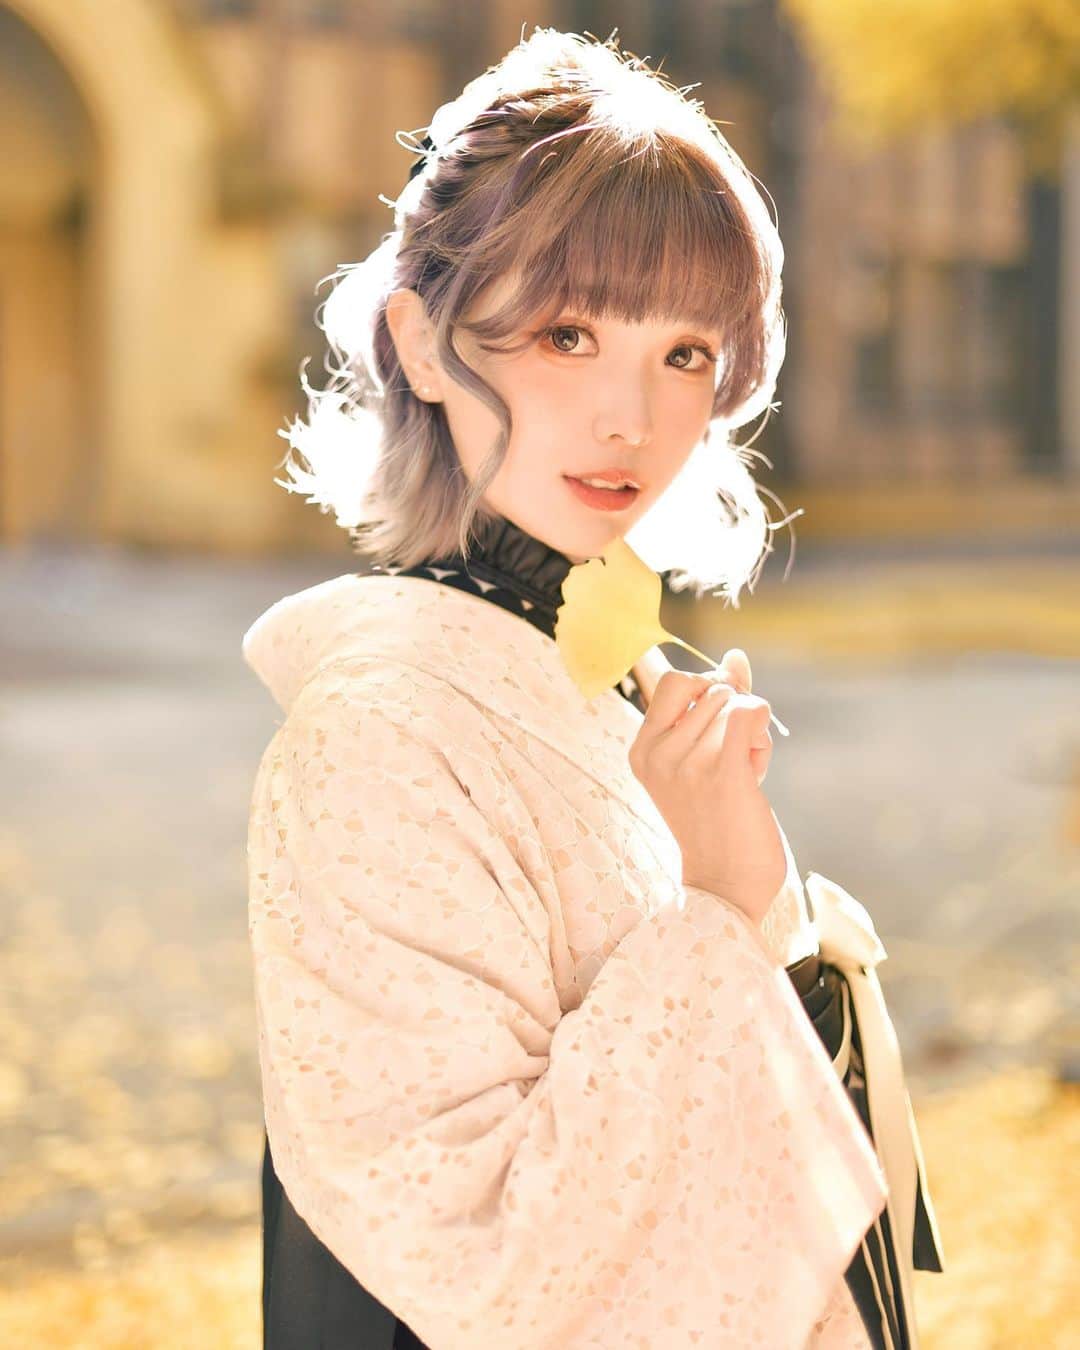 Elyのインスタグラム：「In the afternoon, where ginkgo and sunlight merge, enjoying the rustling sound of fallen leaves as we take a stroll together.🍂 Full 30p in this month set A💌 ✧ 銀杏と陽光が融合する午後、落ち葉の上を一緒に歩きながら、そのサラサラとした音を楽しむ🍂 フル写真セット(30枚)は今月のAセットに収録されています💌 ✧ 銀杏與陽光融合的午後，享受著與你散步在的落葉上的沙沙聲🍂 完整寫真組(30p)收錄在本月A組💌  #ely #elycosplay #portrait #hakama #袴 #銀杏」